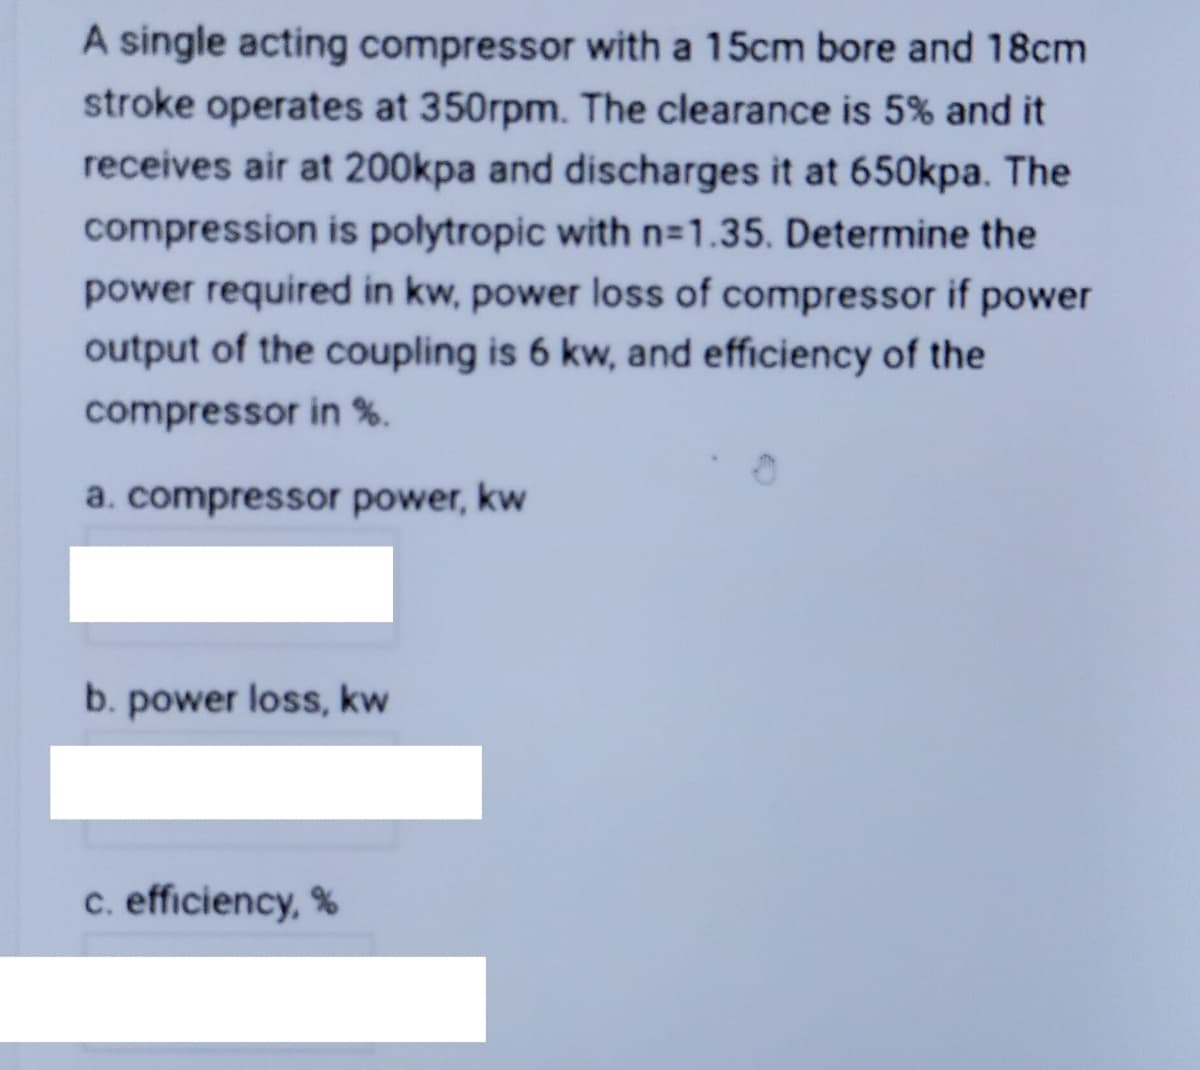 A single acting compressor with a 15cm bore and 18cm
stroke operates at 350rpm. The clearance is 5% and it
receives air at 200kpa and discharges it at 650kpa. The
compression is polytropic with n-1.35. Determine the
power required in kw, power loss of compressor if power
output of the coupling is 6 kw, and efficiency of the
compressor in %.
a. compressor power, kw
b. power loss, kw
c. efficiency, %
